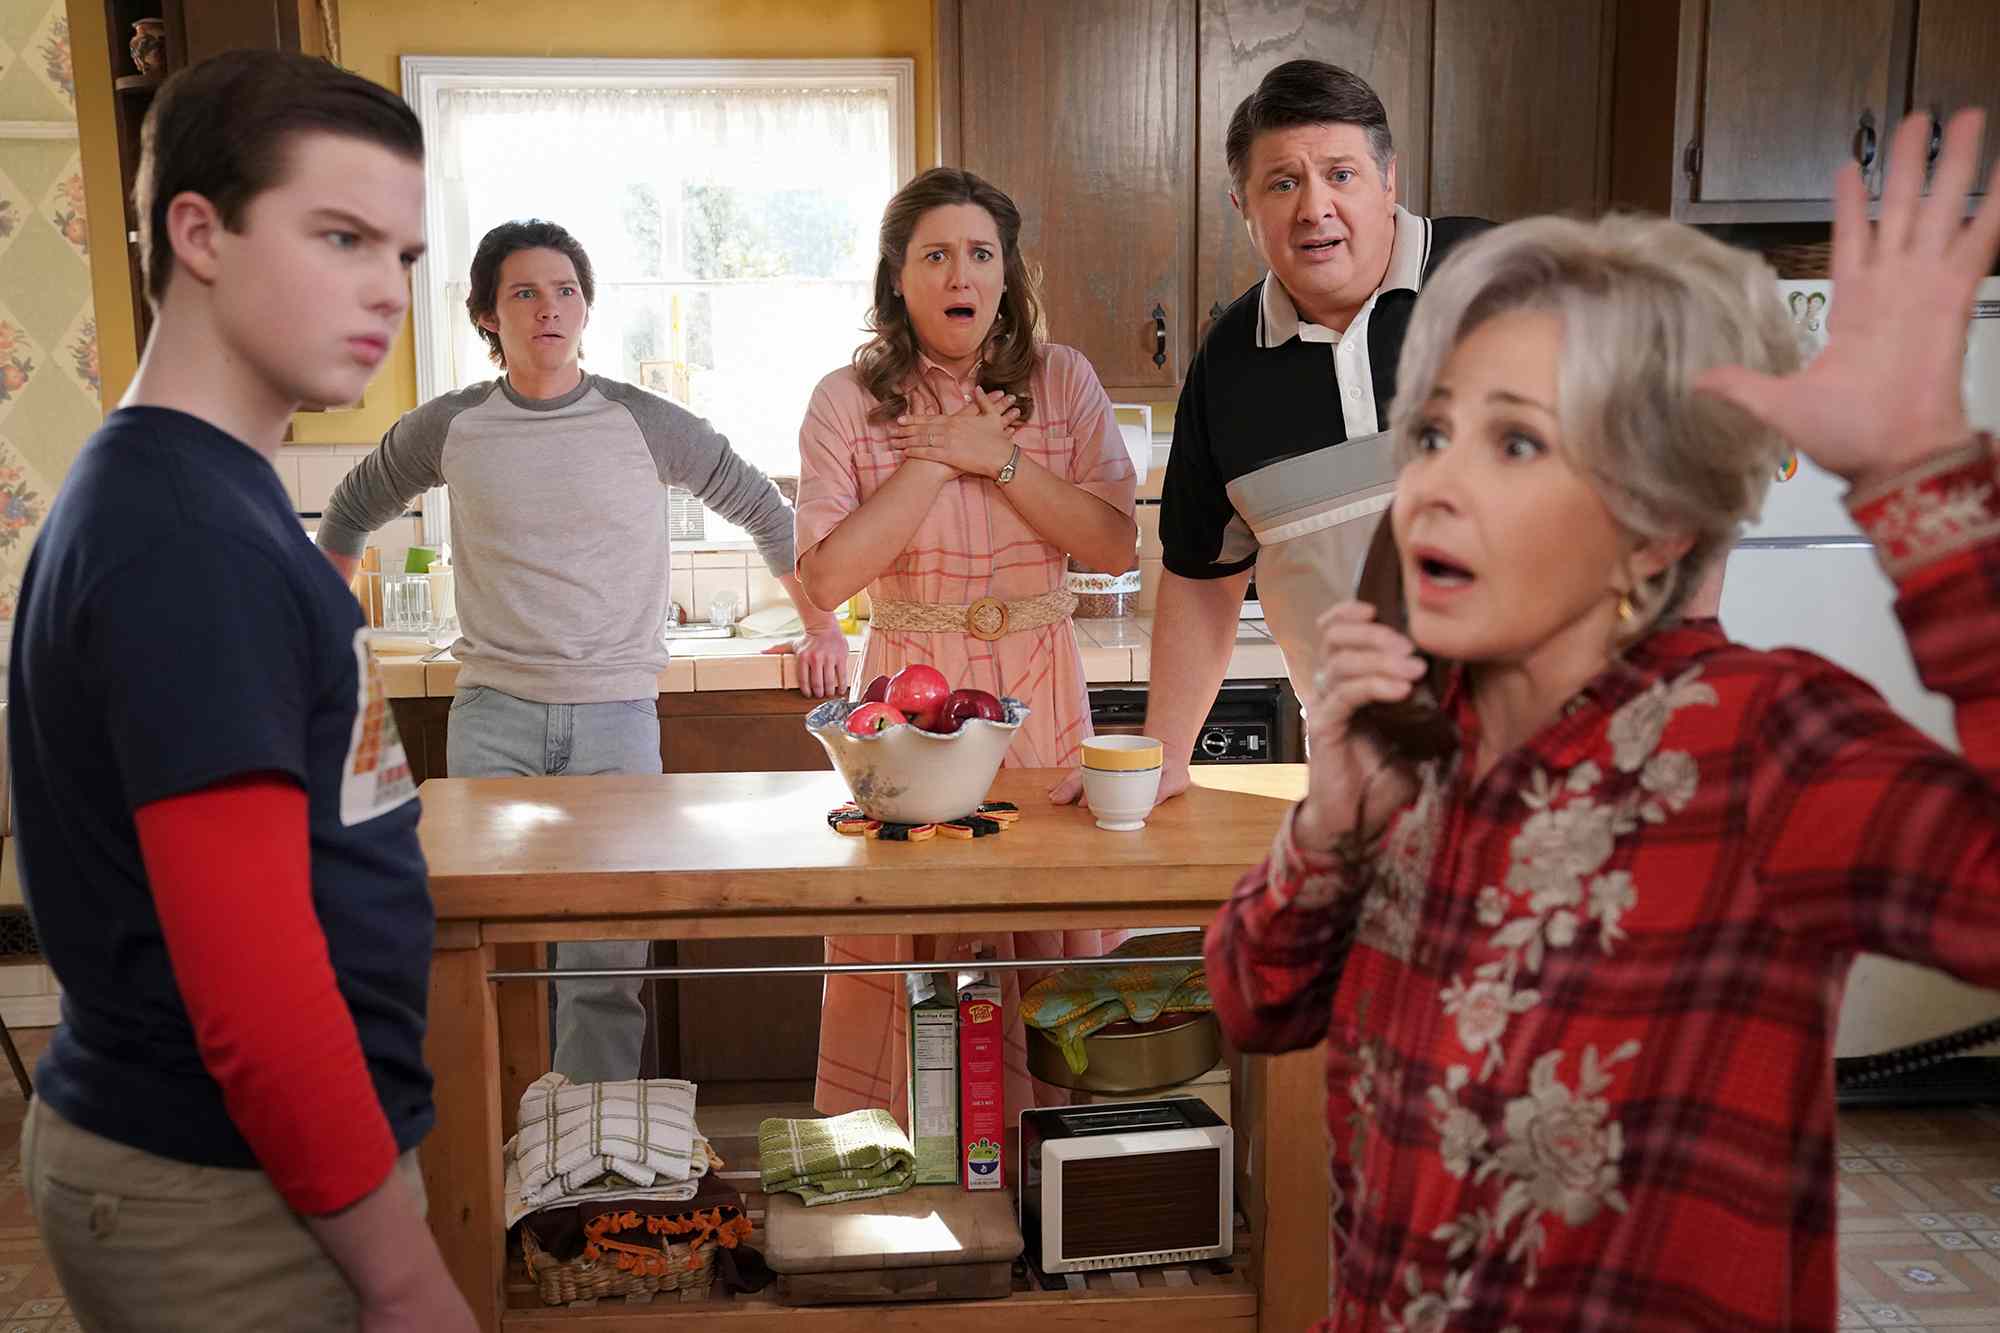 Iain Armitage as Sheldon Cooper, Montana Jordan as Georgie Cooper, Zoe Perry as Mary Cooper, Lance Barber as George Sr., and Annie Potts as Connie 'Meemaw' Tucker in 'Young Sheldon'. 